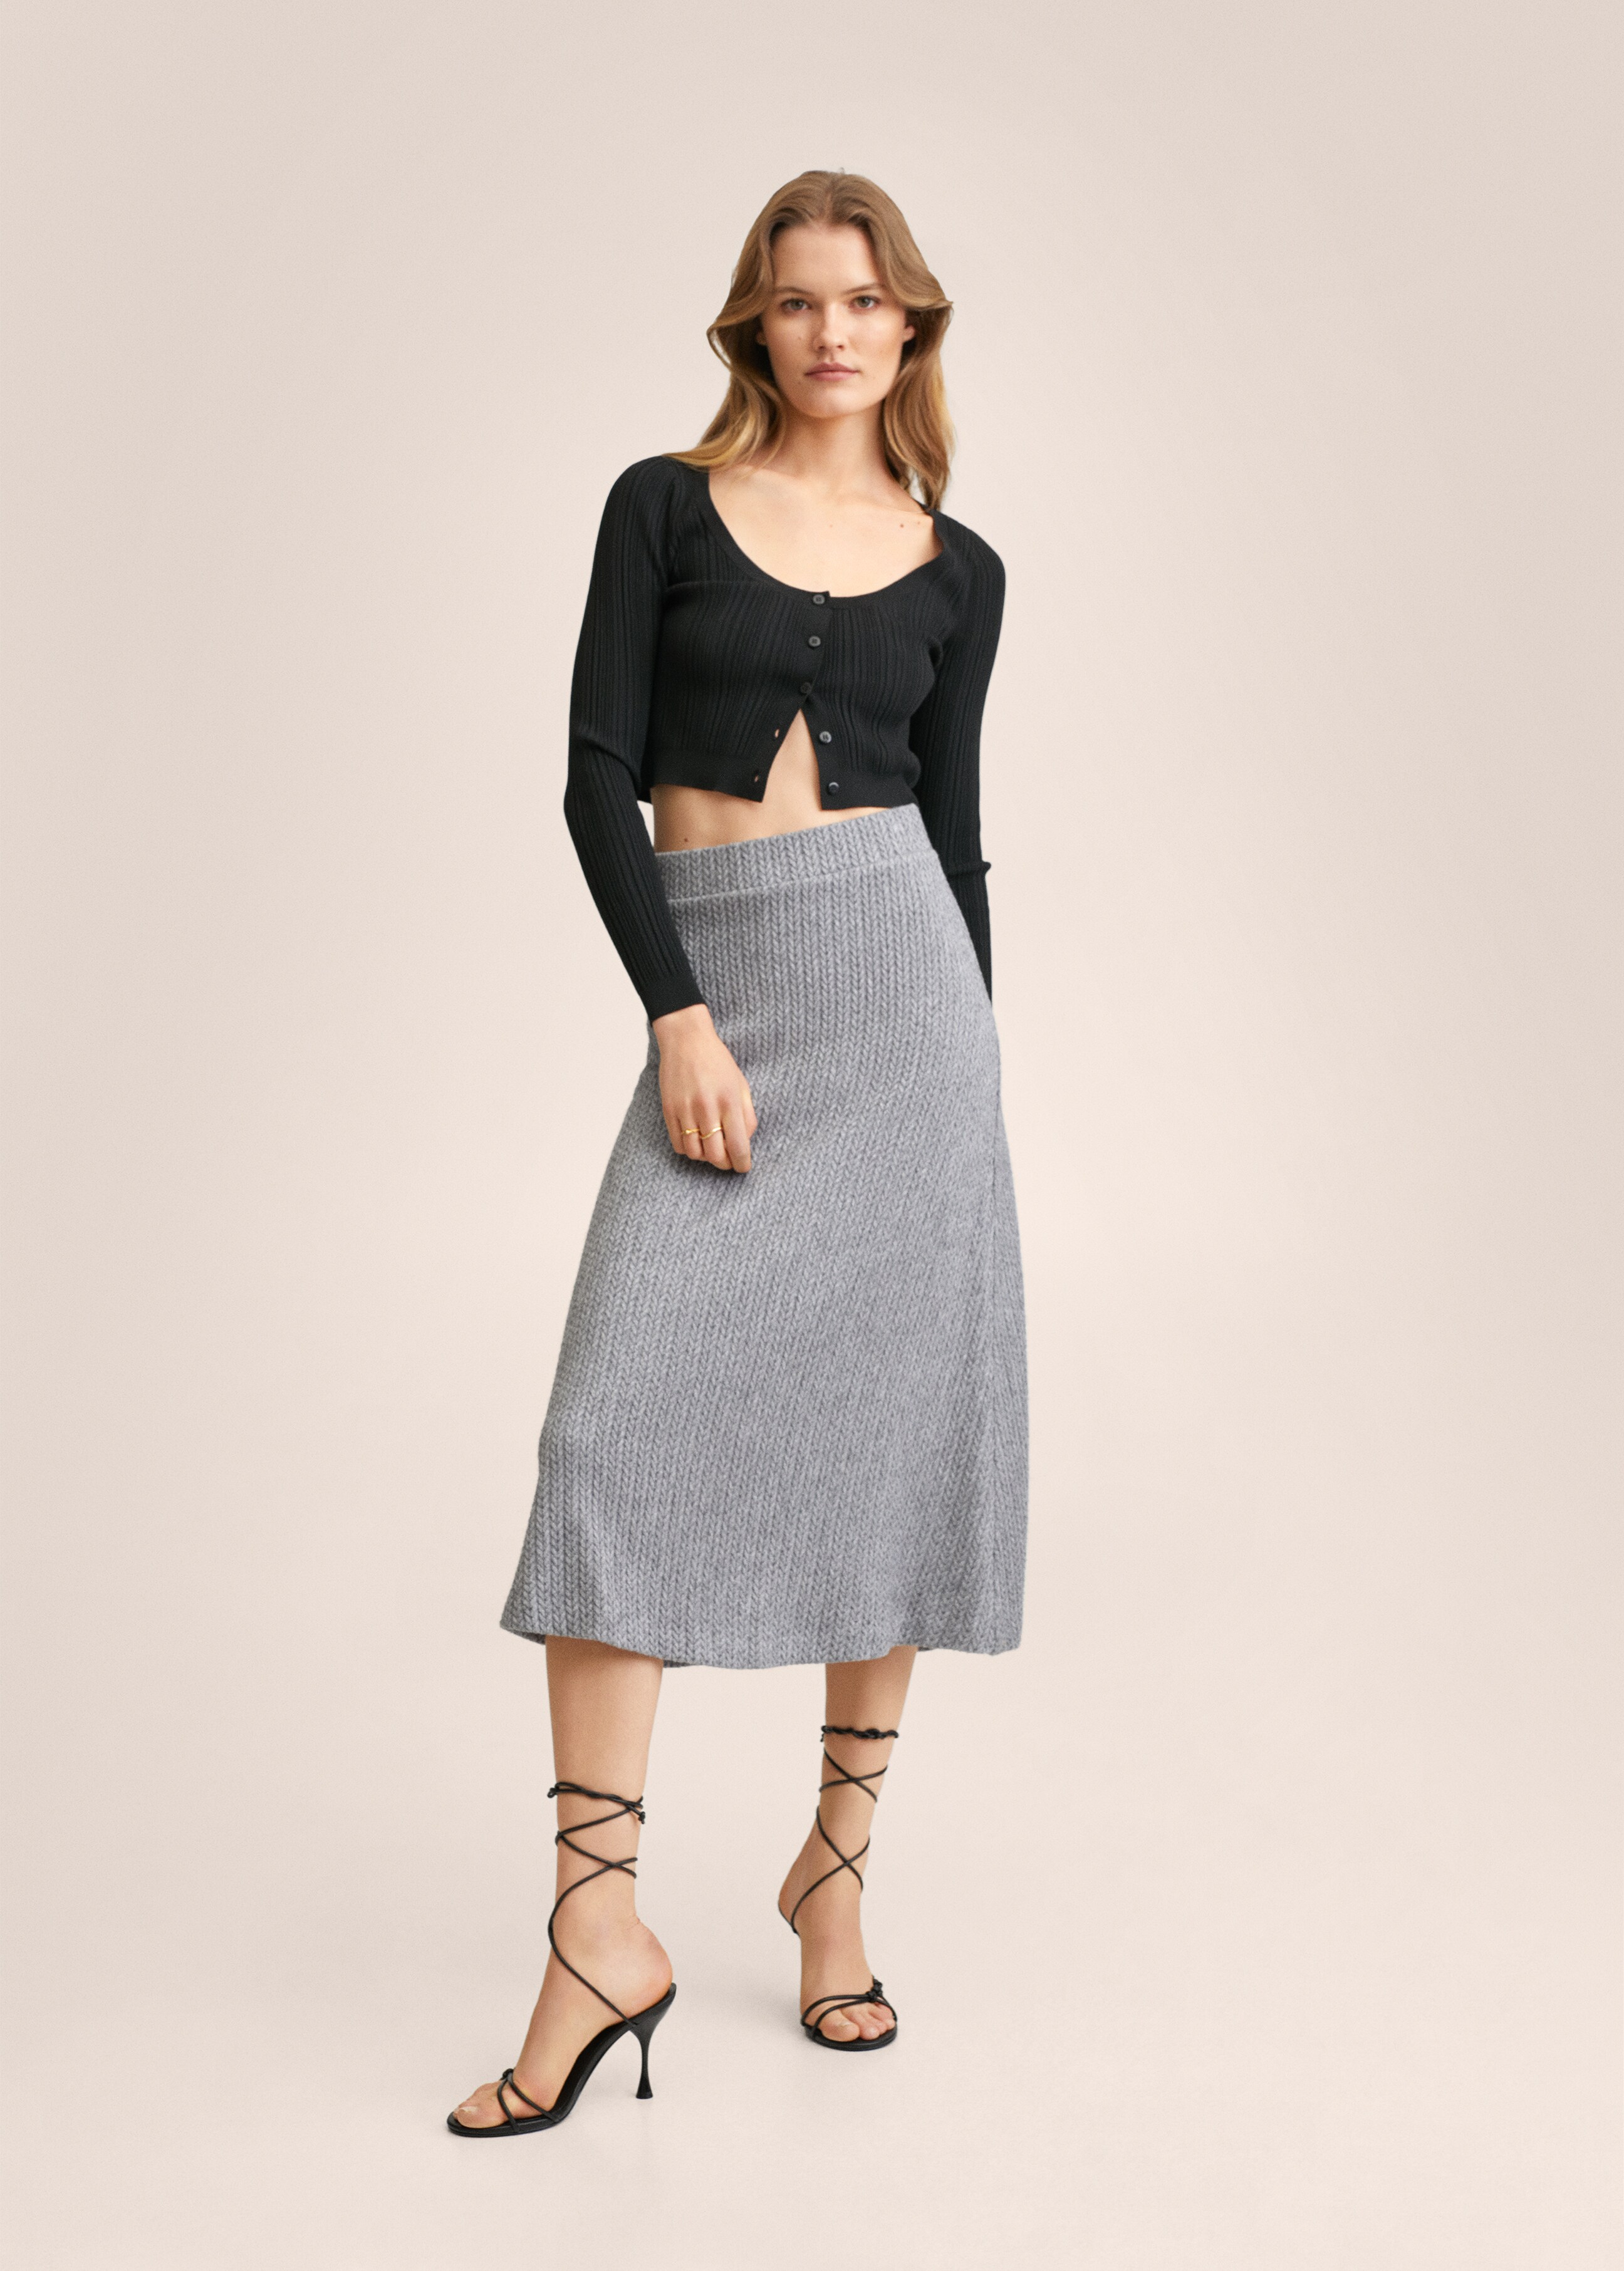 Cable-knit skirt - General plane